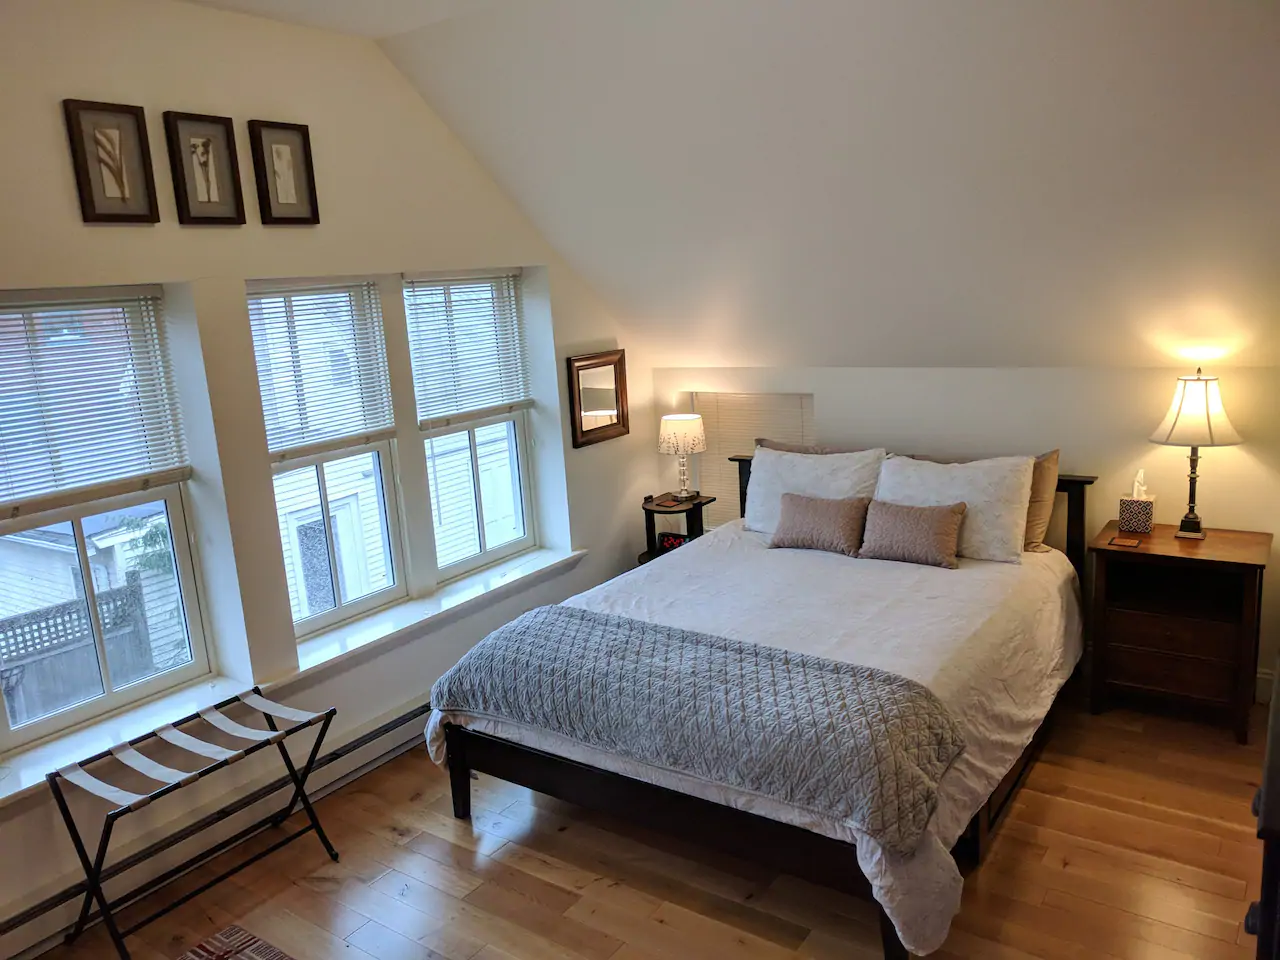 airbnb in burlington vermont - image of cozy, white apartment with big windows